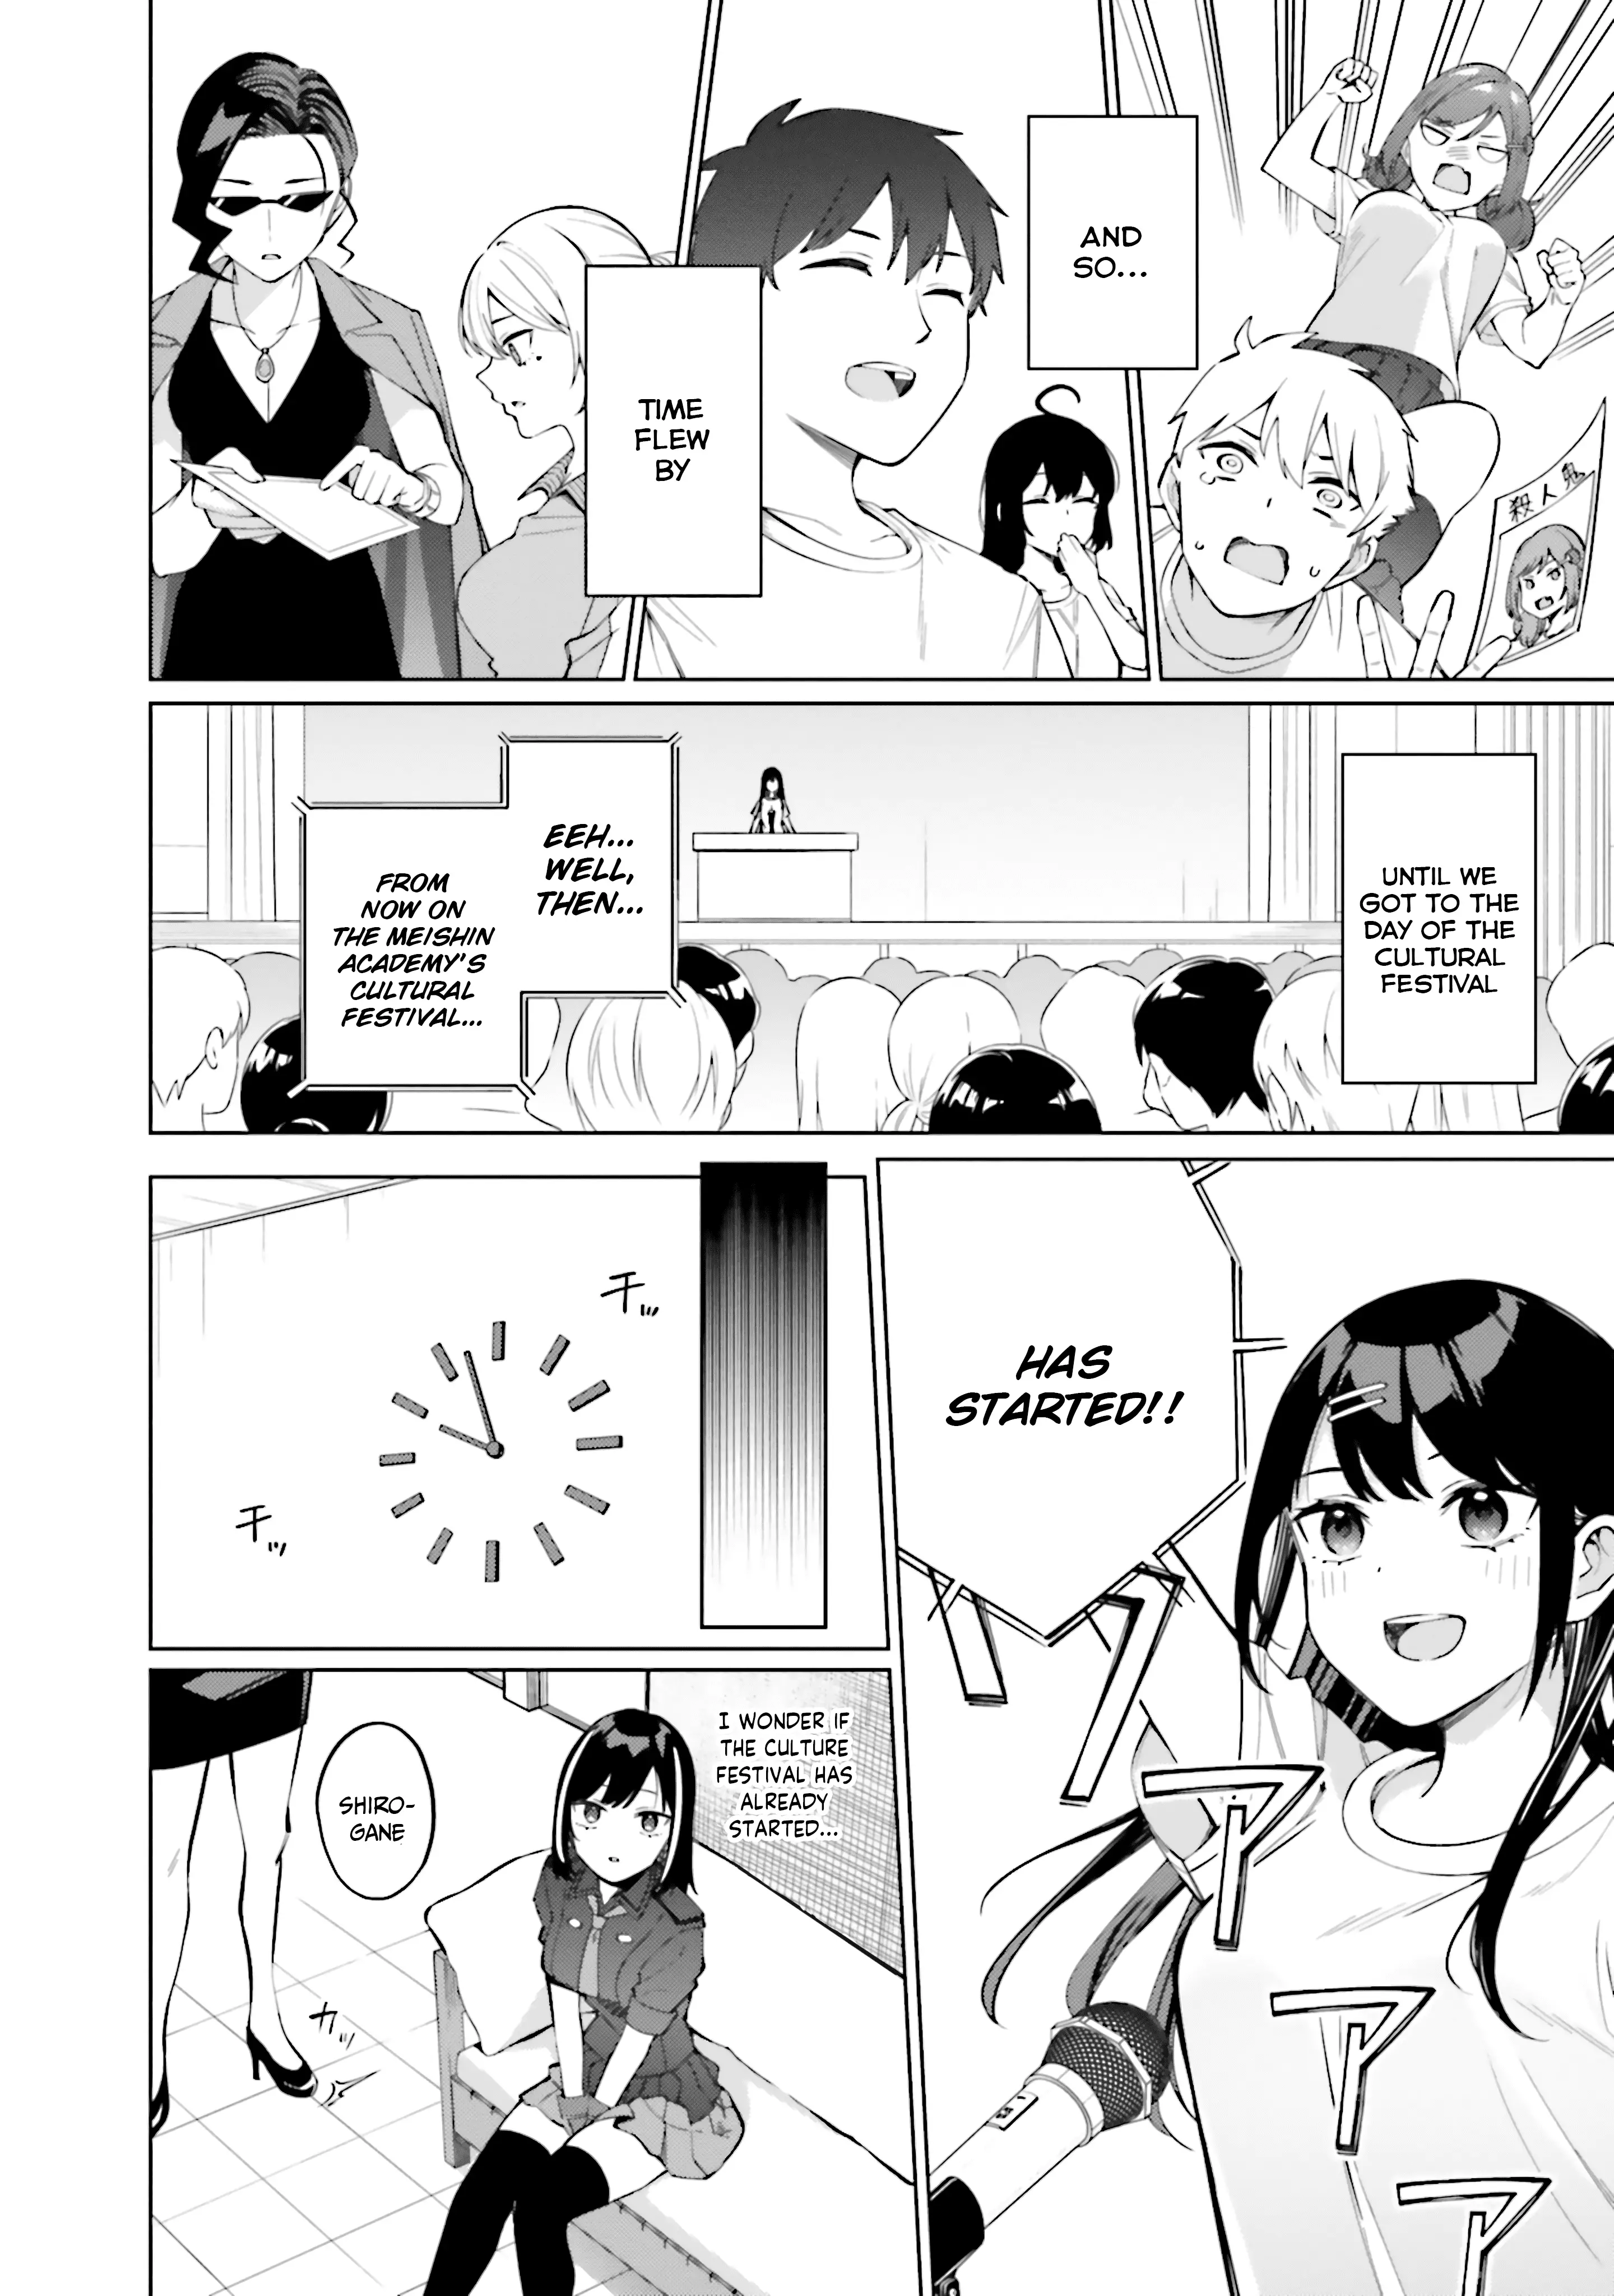 I Don't Understand Shirogane-San's Facial Expression At All - 14 page 25-348f5845